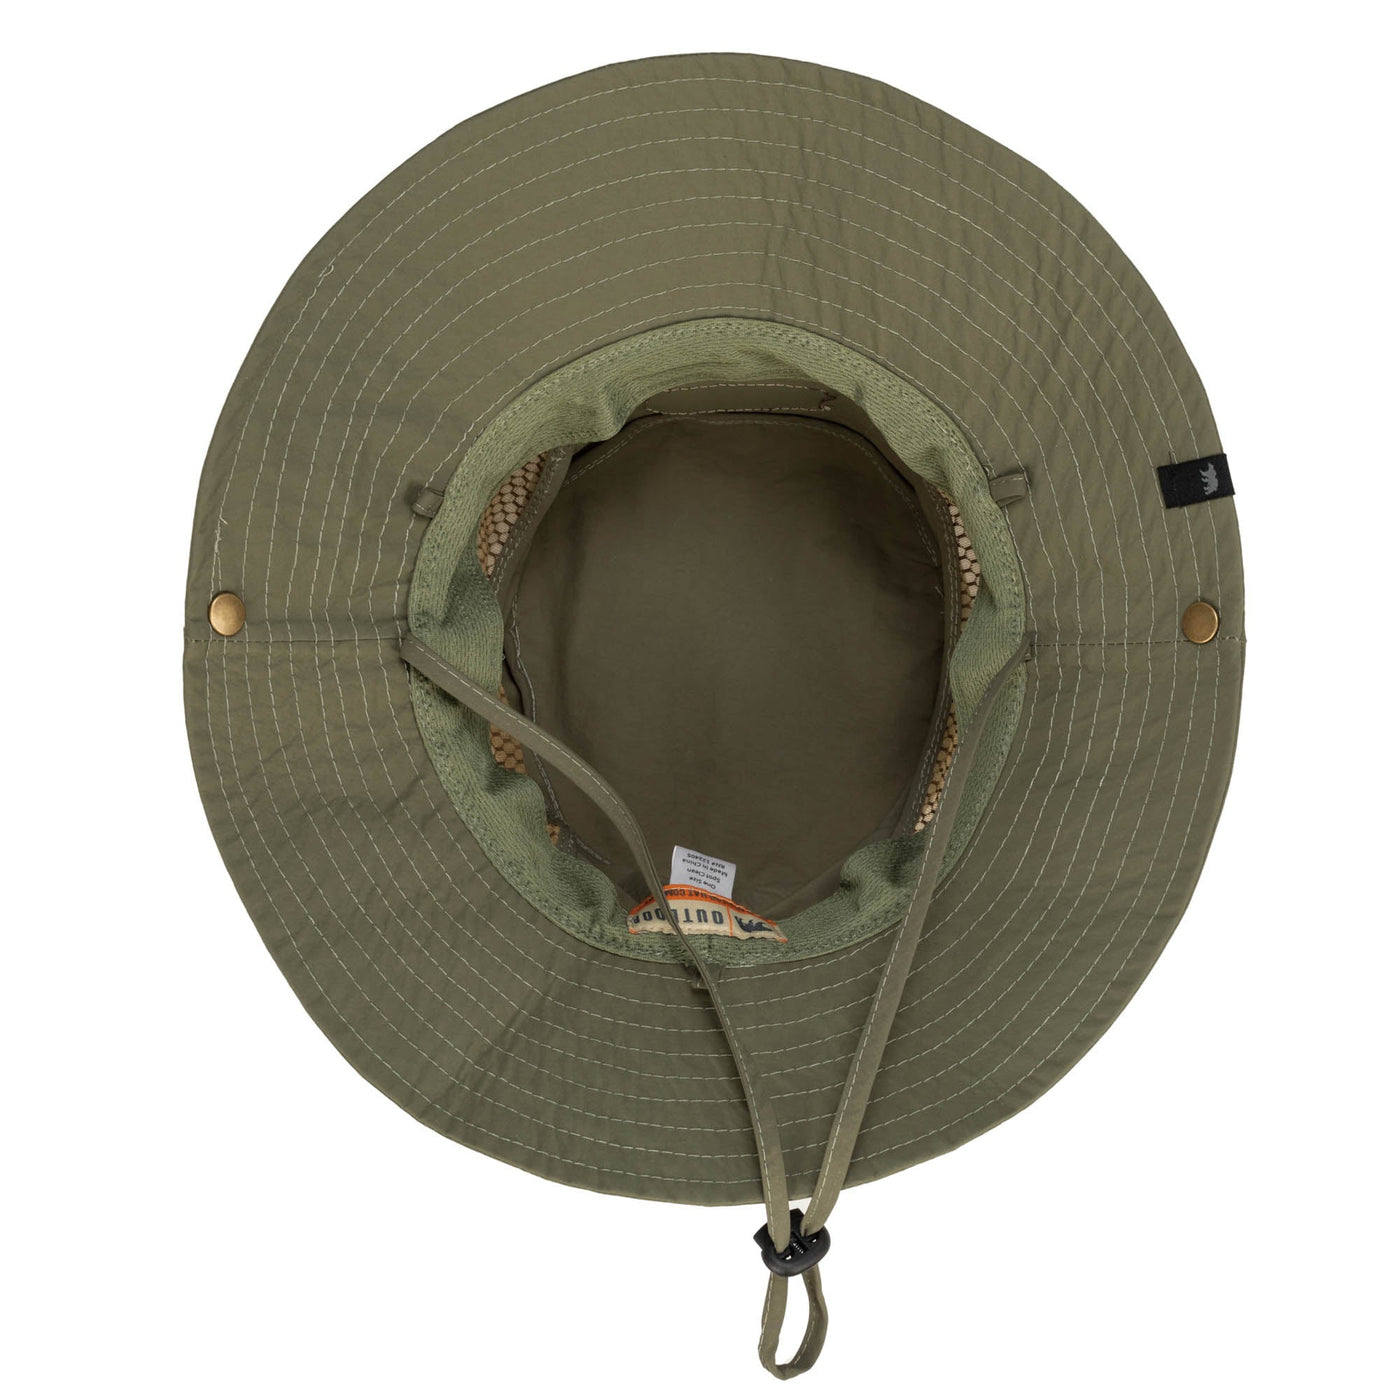 OUTDOOR - Outdoor Americana Bear Patch Boonie Hat